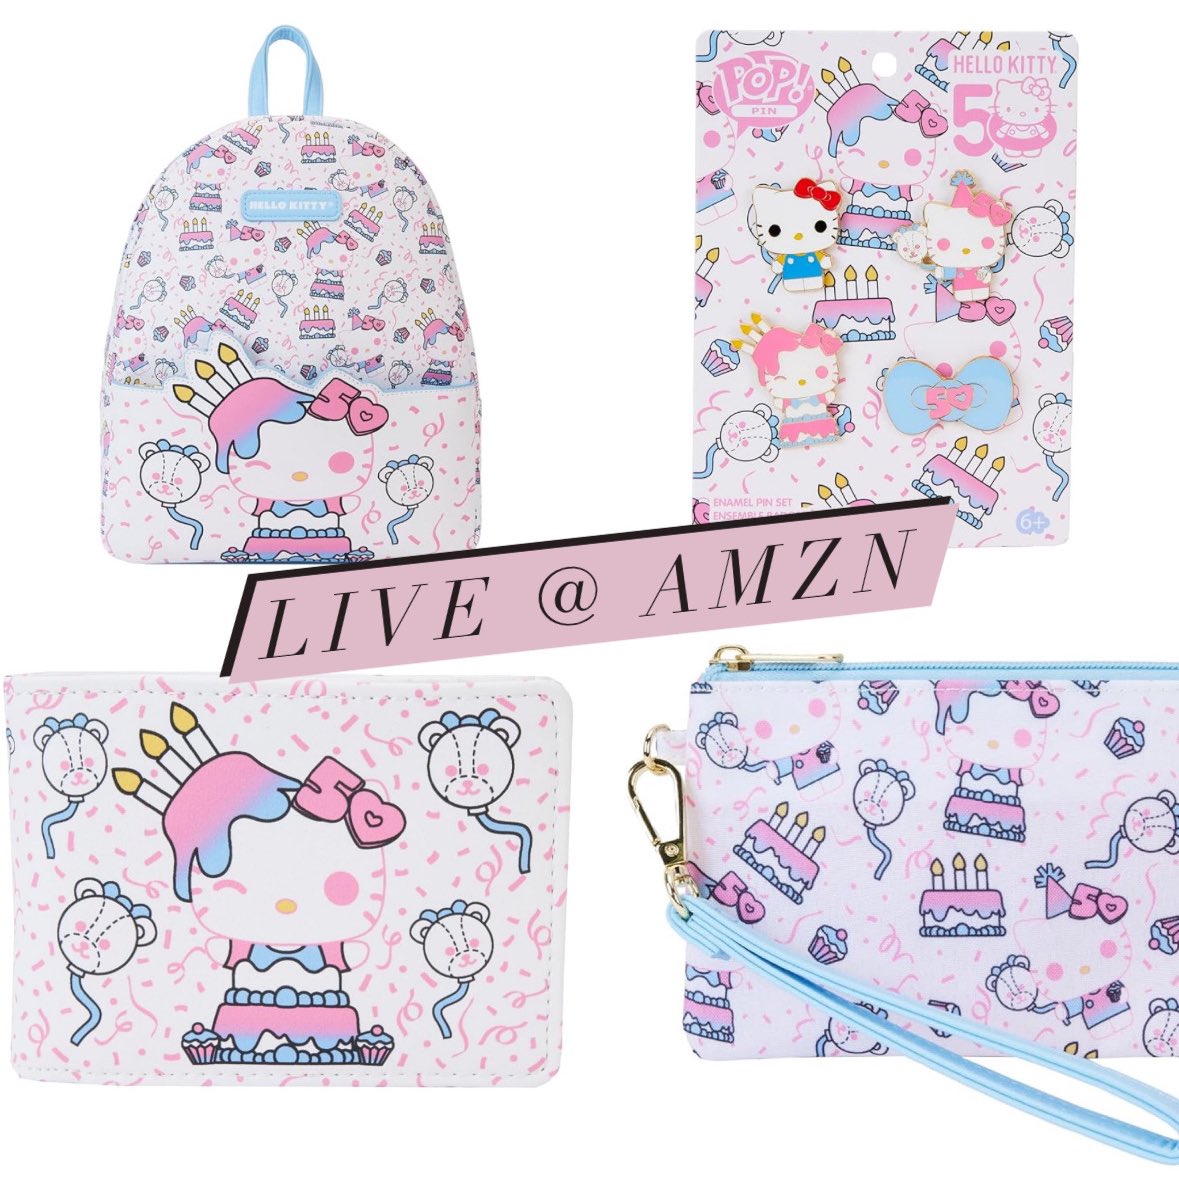 Now live at Amazon, for Sanrio fans with the new Hello Kitty Mini Cake Backpack, Wallet, Purse and Pin set!
Linky ~ amzn.to/3JUVyz3
#Ad #FPN #FunkoPOPNews #Funko #POP #HelloKitty #Backpack #Loungefly #Sanrio